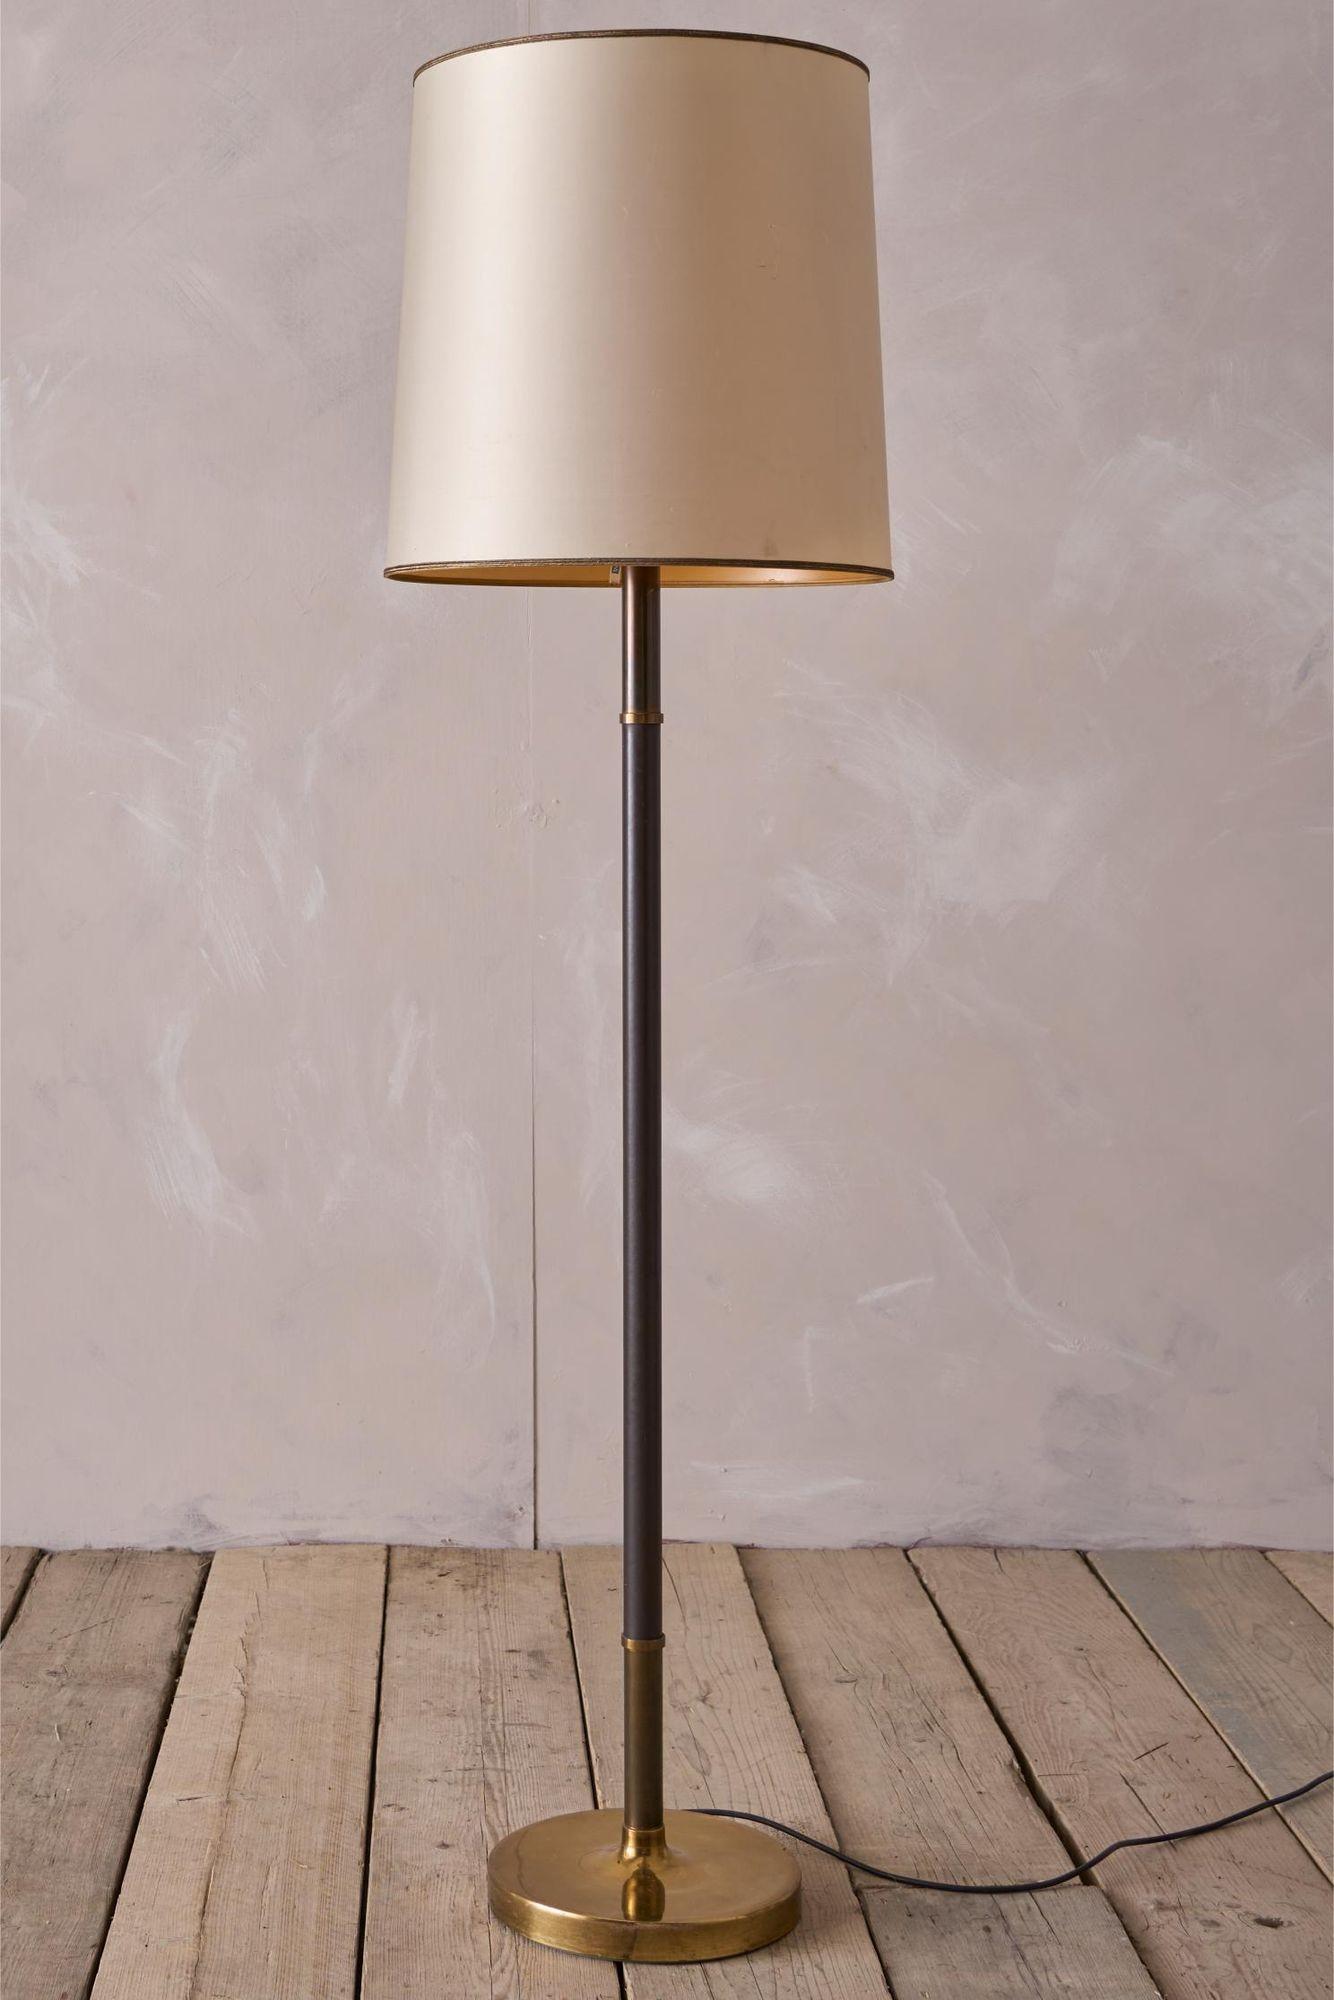 Mid century brown leather and brass floor lamp In Good Condition For Sale In Malton, GB